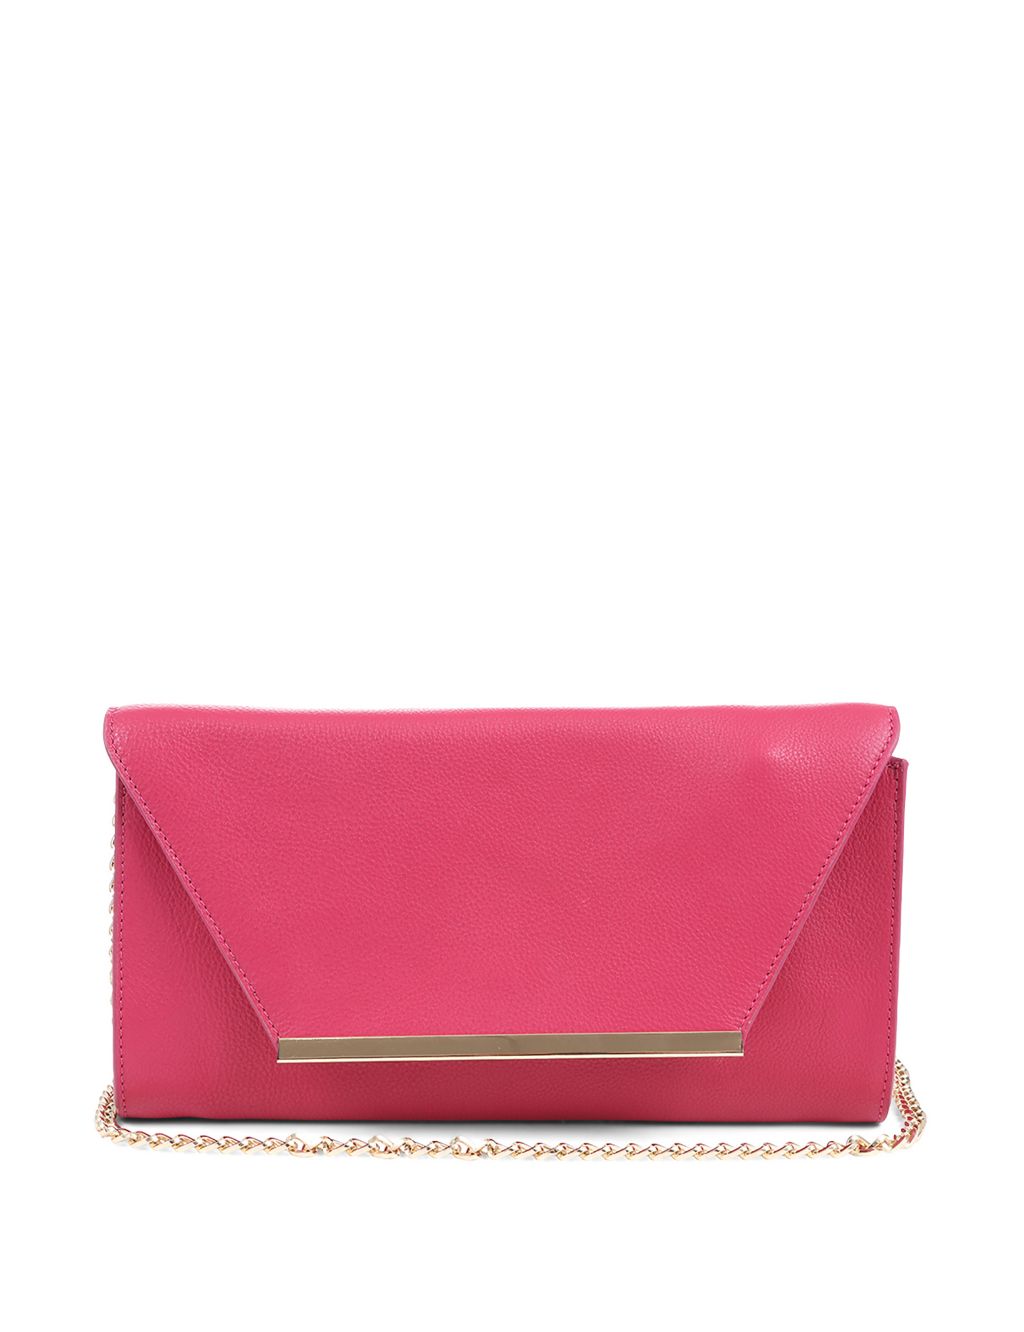 Leather Chain Strap Clutch Bag